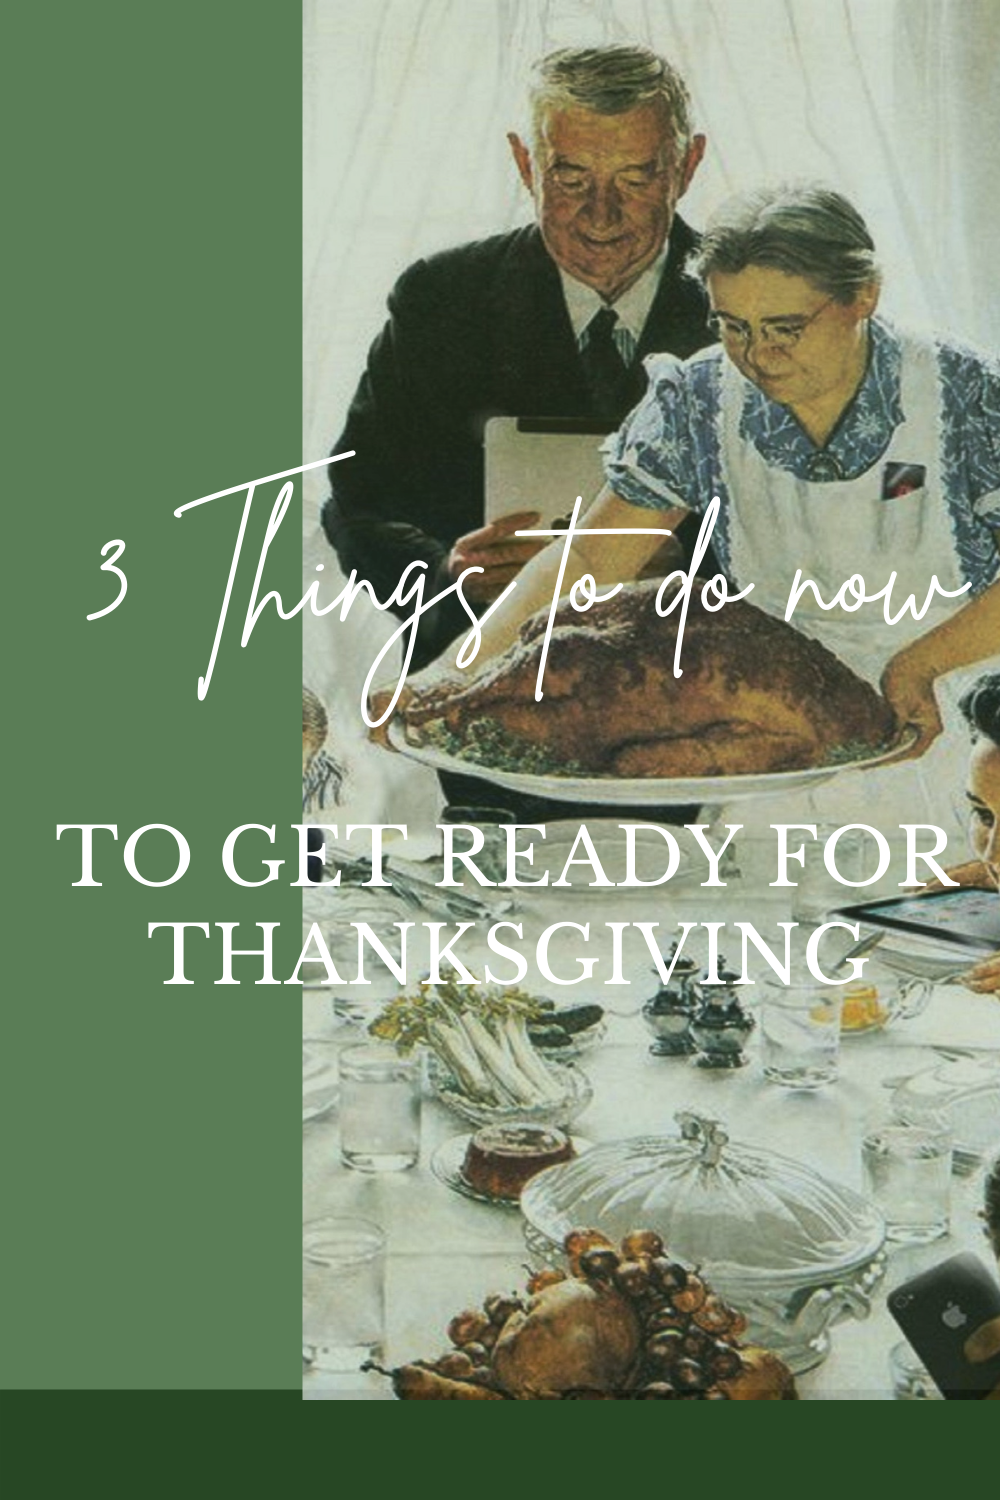 3 Things You Can Do Now to Get Ready for Thanksgiving